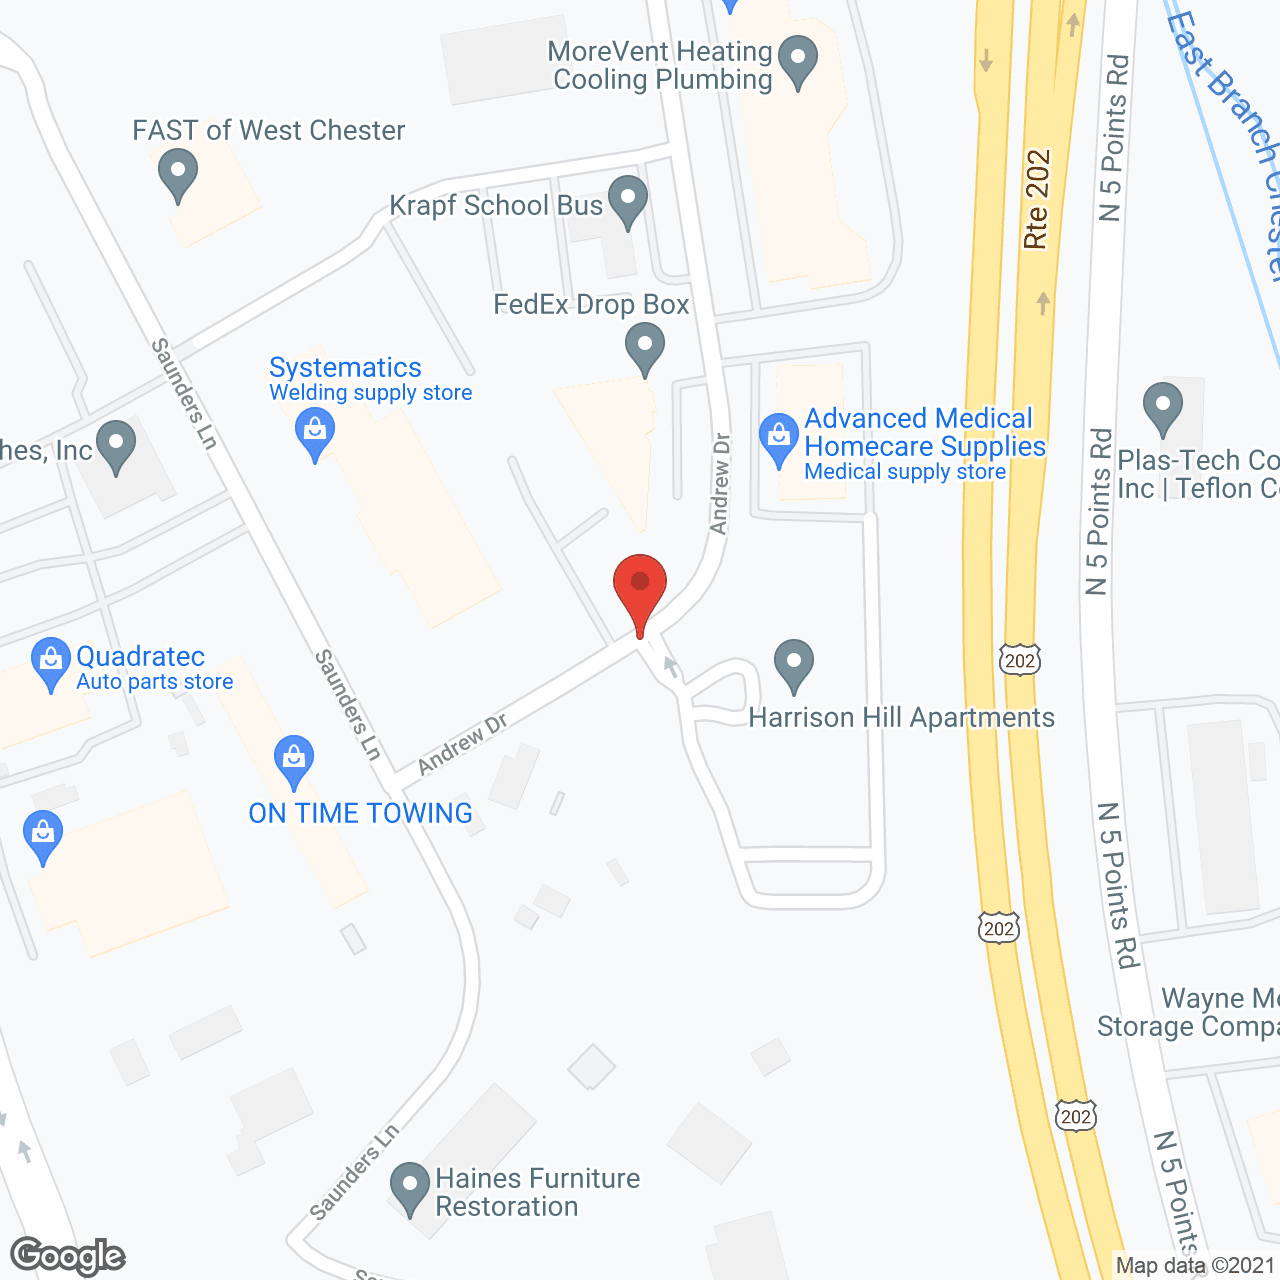 Harrison Hill Apartments in google map